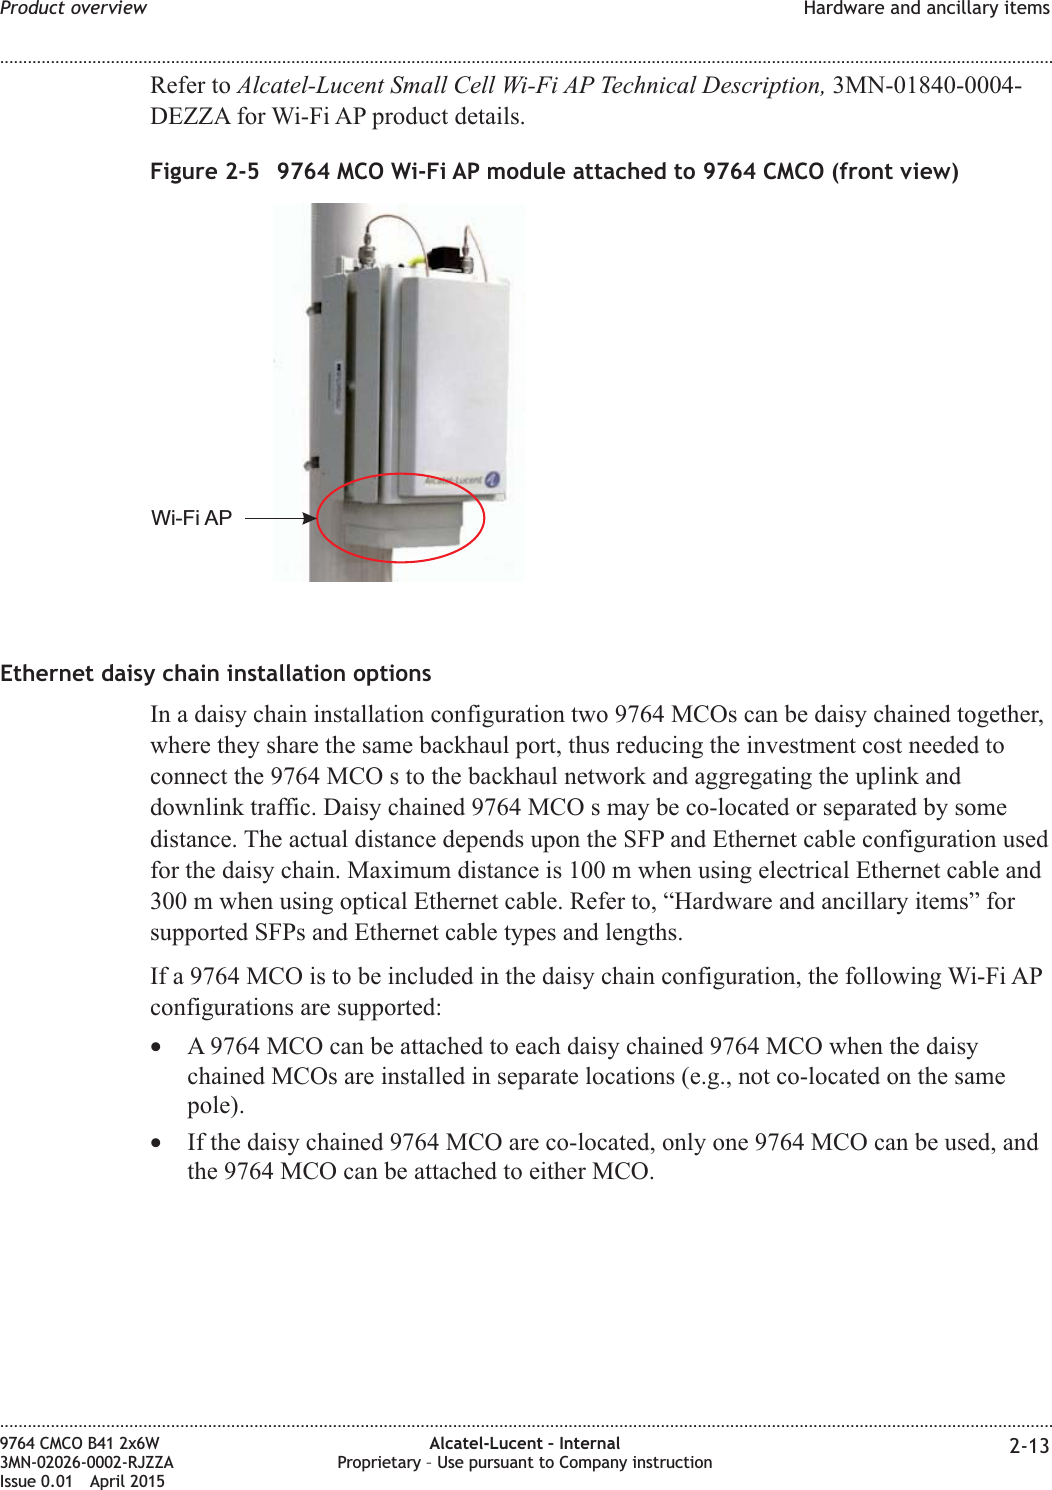 Refer to Alcatel-Lucent Small Cell Wi-Fi AP Technical Description, 3MN-01840-0004-DEZZA for Wi-Fi AP product details.Ethernet daisy chain installation optionsIn a daisy chain installation configuration two 9764 MCOs can be daisy chained together,where they share the same backhaul port, thus reducing the investment cost needed toconnect the 9764 MCO s to the backhaul network and aggregating the uplink anddownlink traffic. Daisy chained 9764 MCO s may be co-located or separated by somedistance. The actual distance depends upon the SFP and Ethernet cable configuration usedfor the daisy chain. Maximum distance is 100 m when using electrical Ethernet cable and300 m when using optical Ethernet cable. Refer to, “Hardware and ancillary items” forsupported SFPs and Ethernet cable types and lengths.If a 9764 MCO is to be included in the daisy chain configuration, the following Wi-Fi APconfigurations are supported:•A 9764 MCO can be attached to each daisy chained 9764 MCO when the daisychained MCOs are installed in separate locations (e.g., not co-located on the samepole).•If the daisy chained 9764 MCO are co-located, only one 9764 MCO can be used, andthe 9764 MCO can be attached to either MCO.Figure 2-5 9764 MCO Wi-Fi AP module attached to 9764 CMCO (front view)Wi-Fi APProduct overview Hardware and ancillary items........................................................................................................................................................................................................................................................................................................................................................................................................................................................................9764 CMCO B41 2x6W3MN-02026-0002-RJZZAIssue 0.01 April 2015Alcatel-Lucent – InternalProprietary – Use pursuant to Company instruction 2-13PRELIMINARYPRELIMINARY